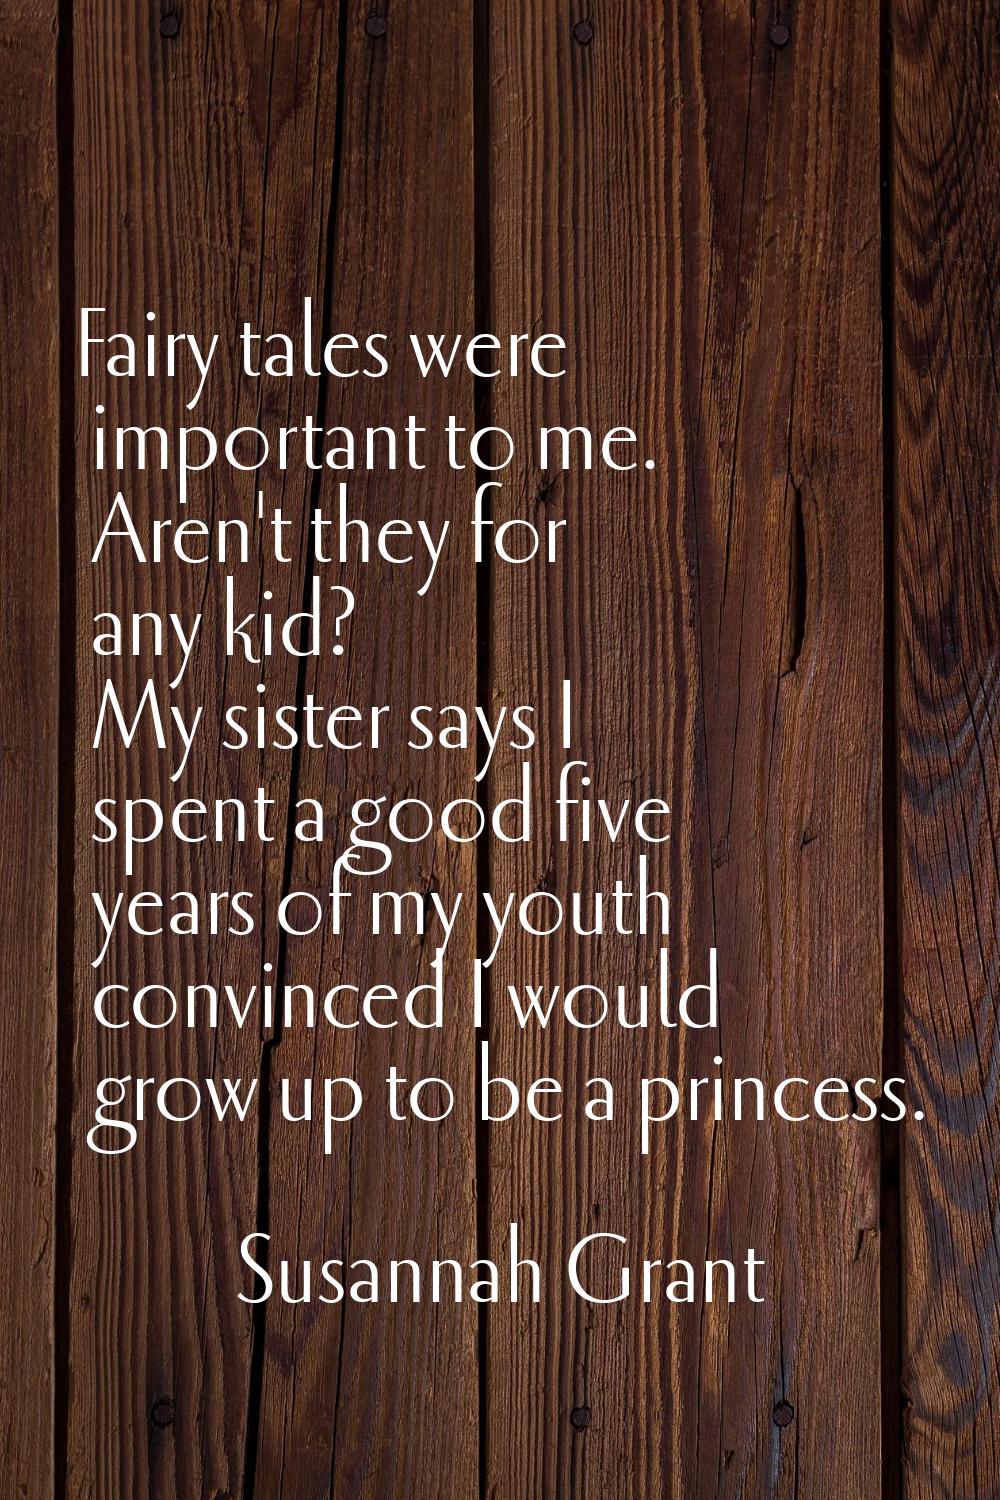 Fairy tales were important to me. Aren't they for any kid? My sister says I spent a good five years